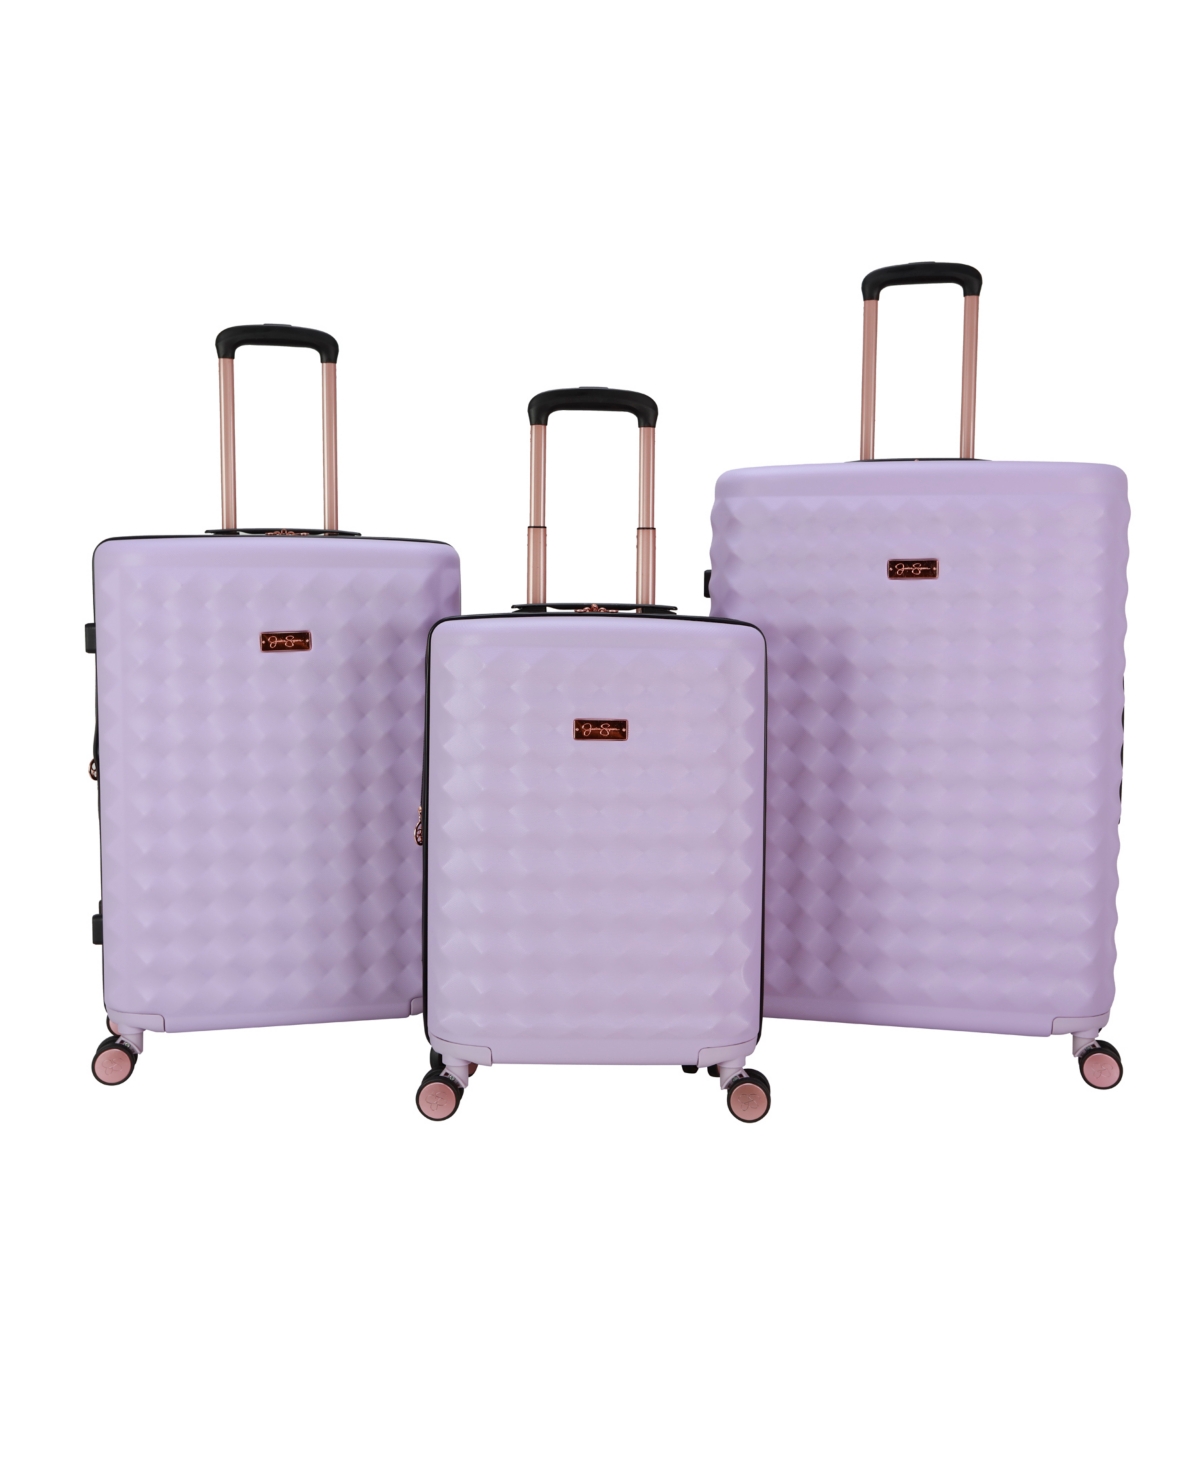 Jessica Simpson Vibrance 3 Piece Hardside Luggage Set In Lavender Frost